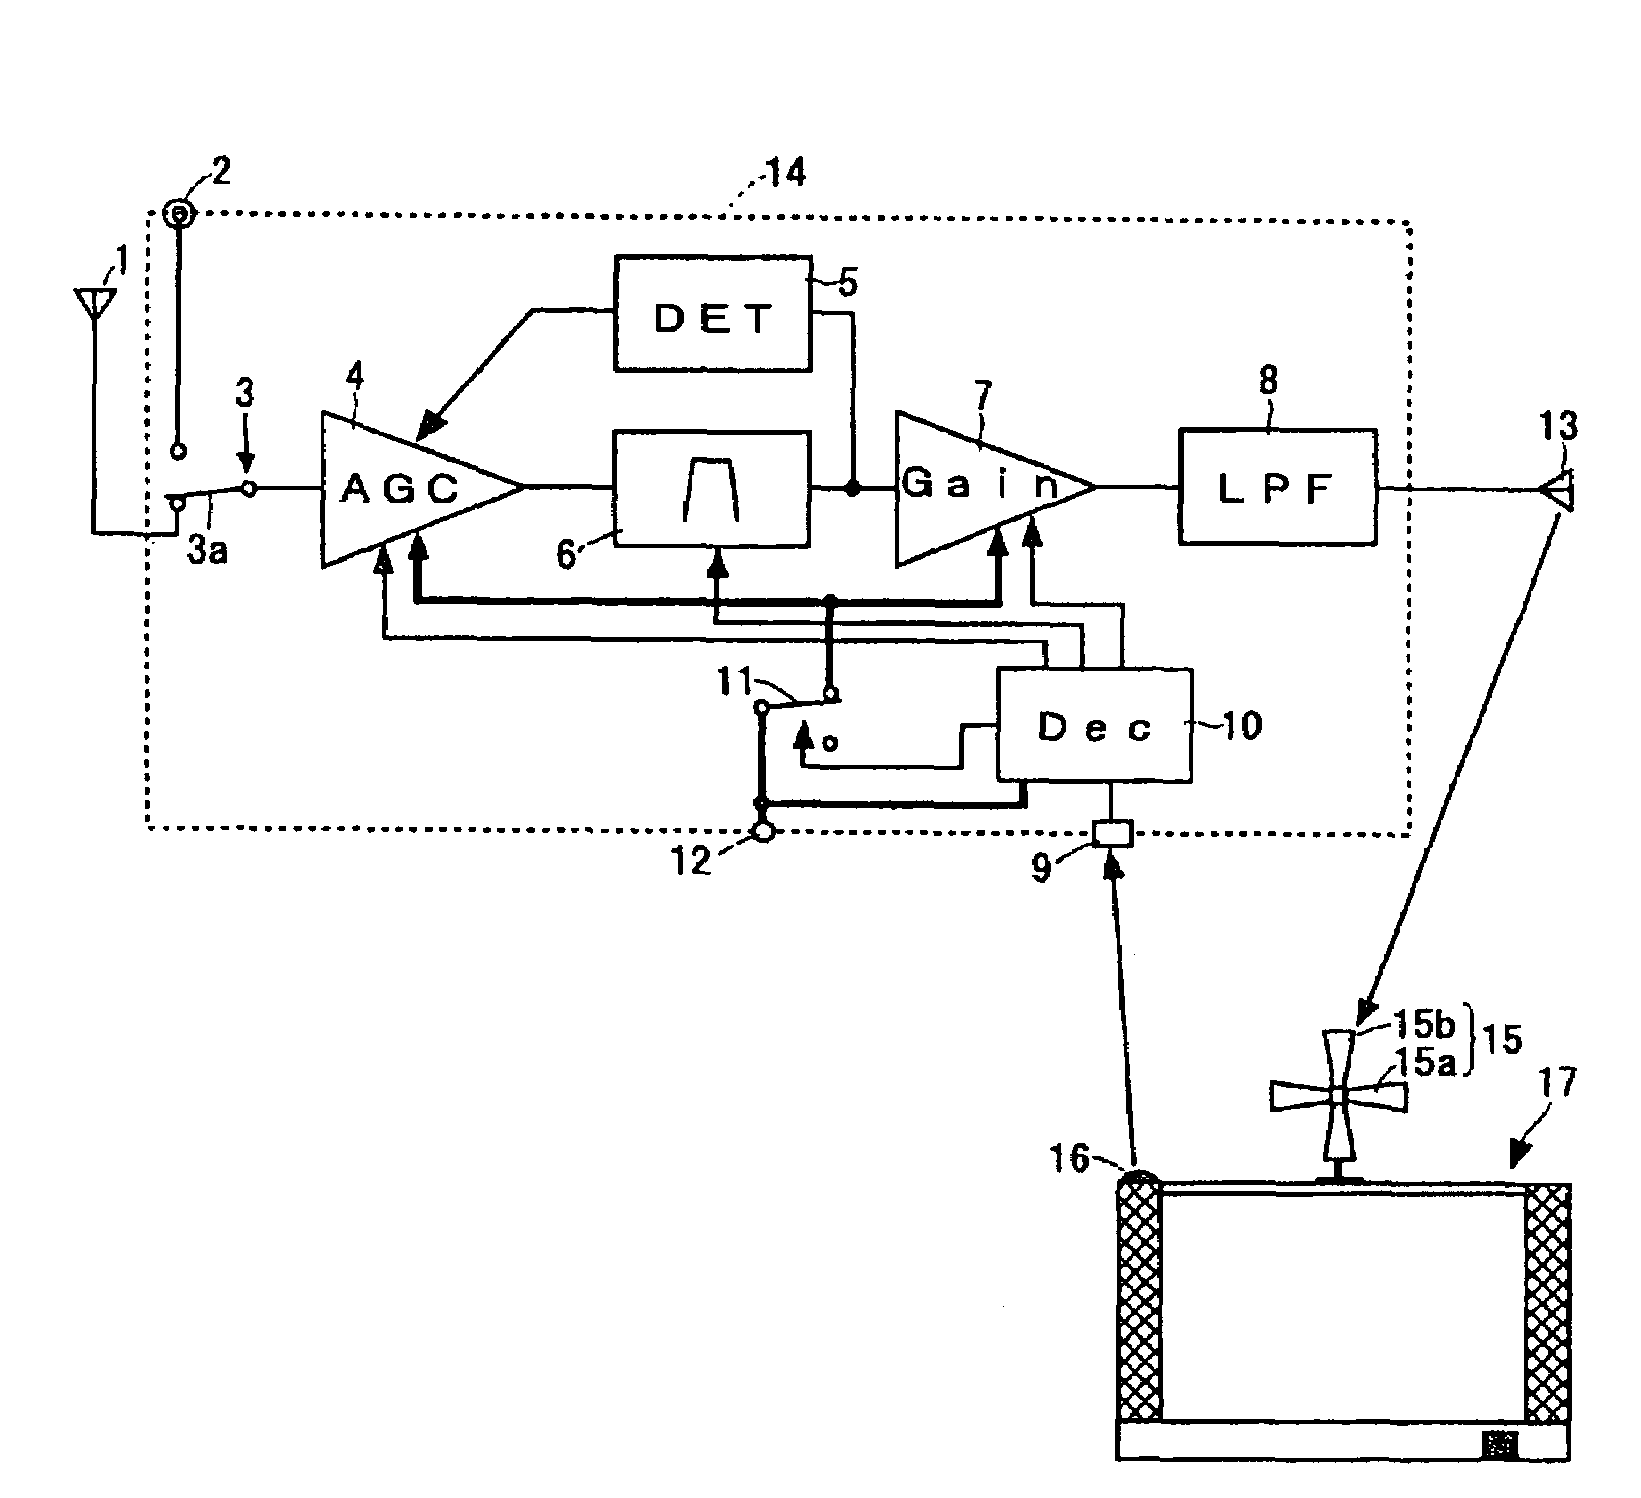 Re-transmitter and digital broadcast receiving system